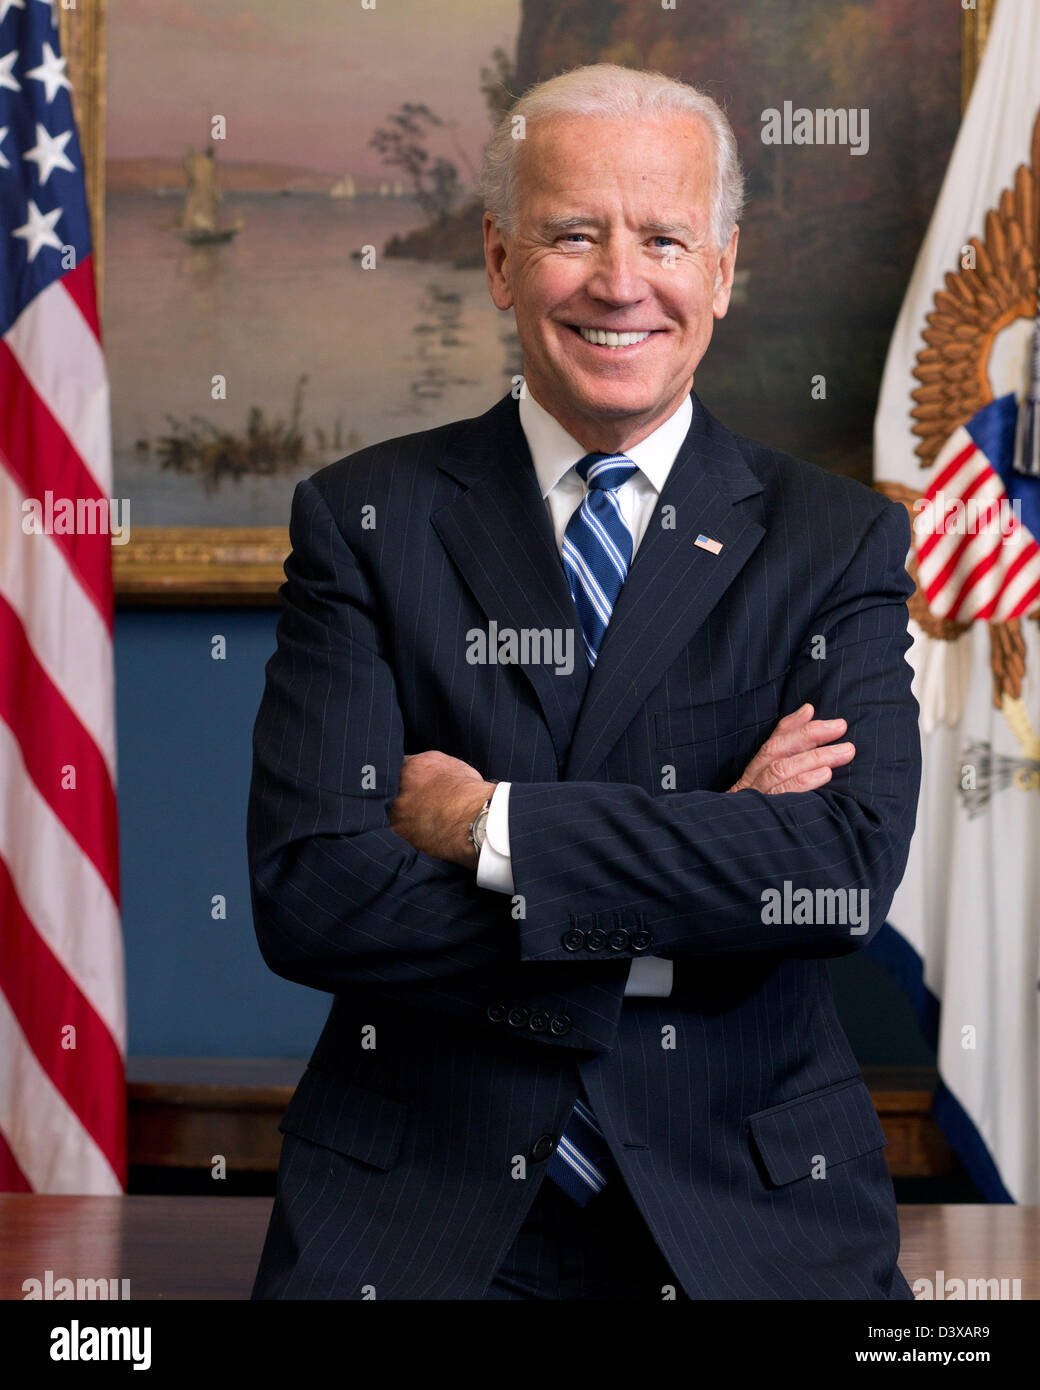 Official portrait of US Vice President Joe Biden in his West Wing Office at the White House January 10, 2013 in Washington, DC. Stock Photo